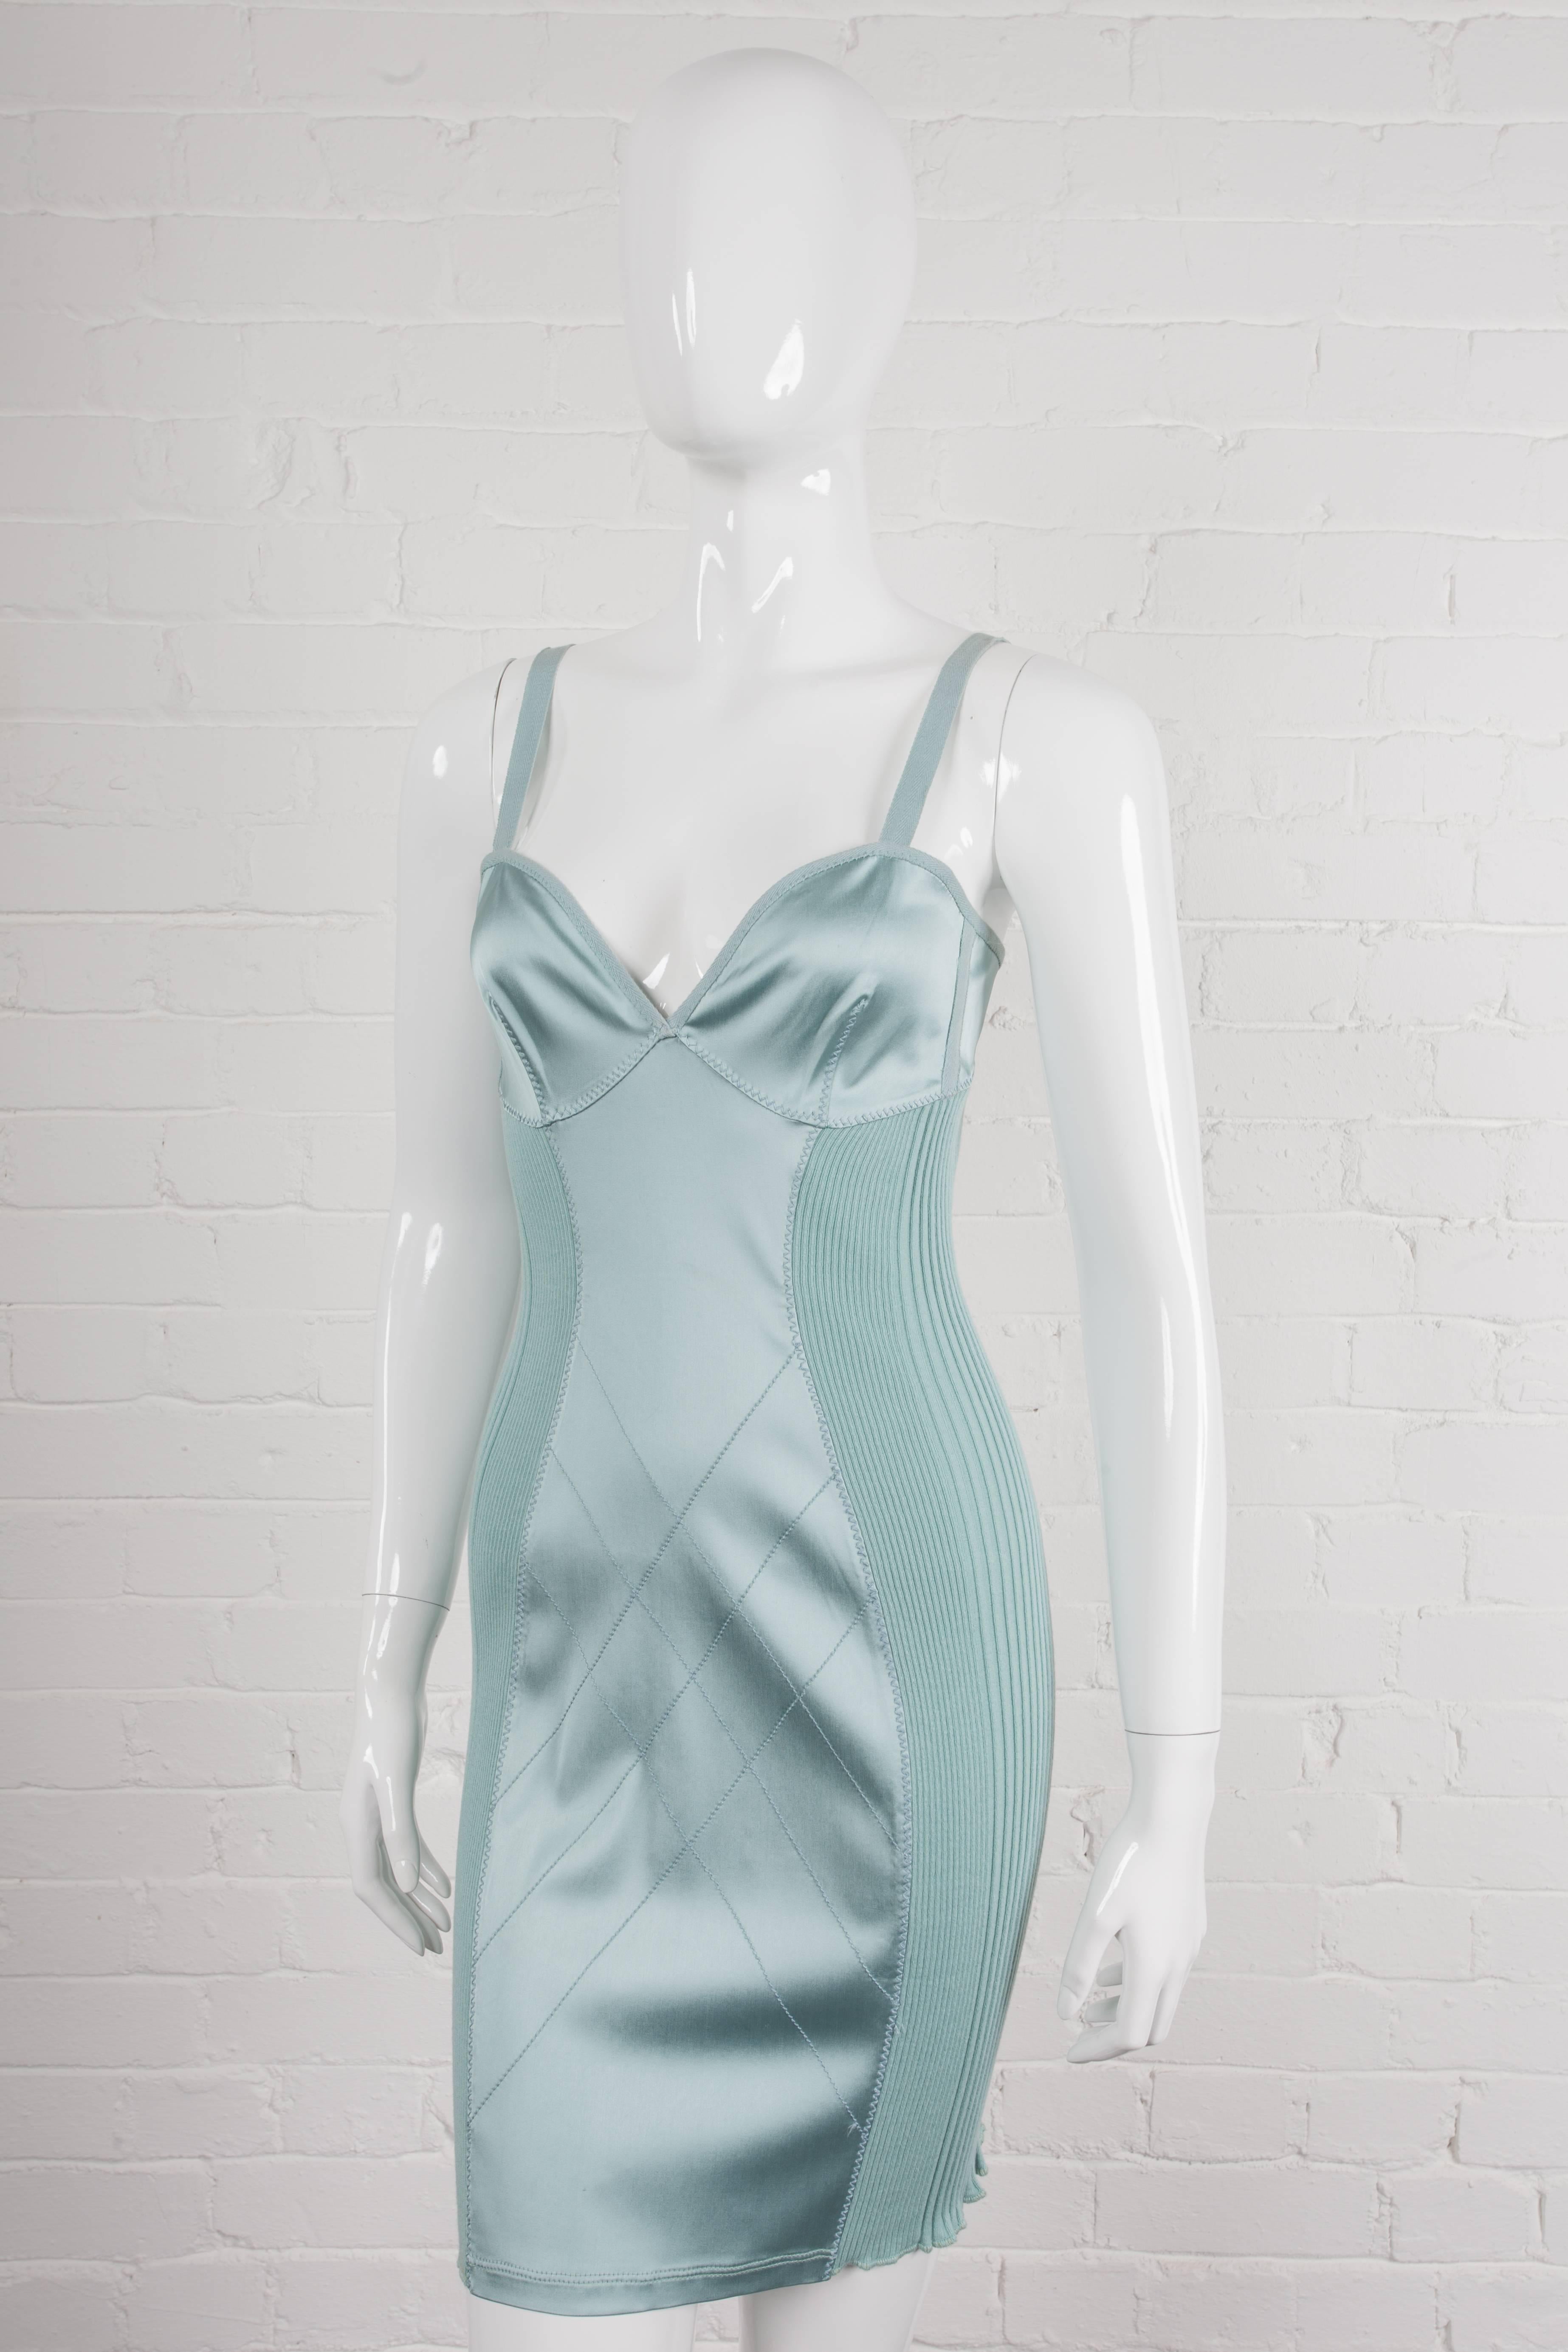 Vintage 1992 negligé dress.

A lingerie-style fitted dress made from viscose rayon and lycra with cotton ribbed side panels. From the Spring/Summer 1992 “Elegance Contest” Collection.  Features cotton taped shoulder straps and binding, a diagonal